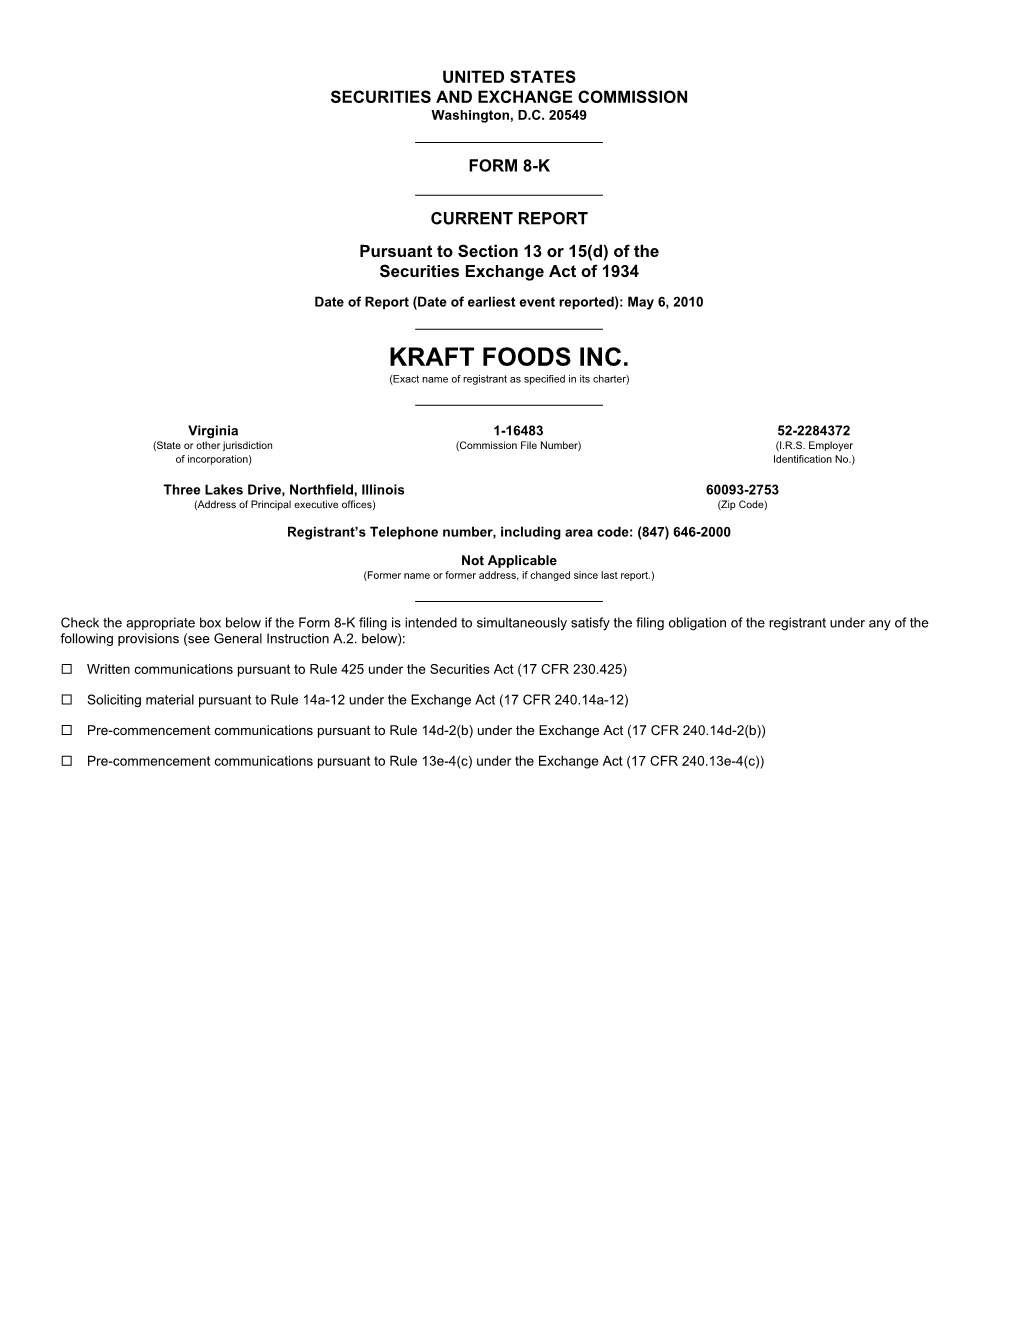 KRAFT FOODS INC. (Exact Name of Registrant As Specified in Its Charter)